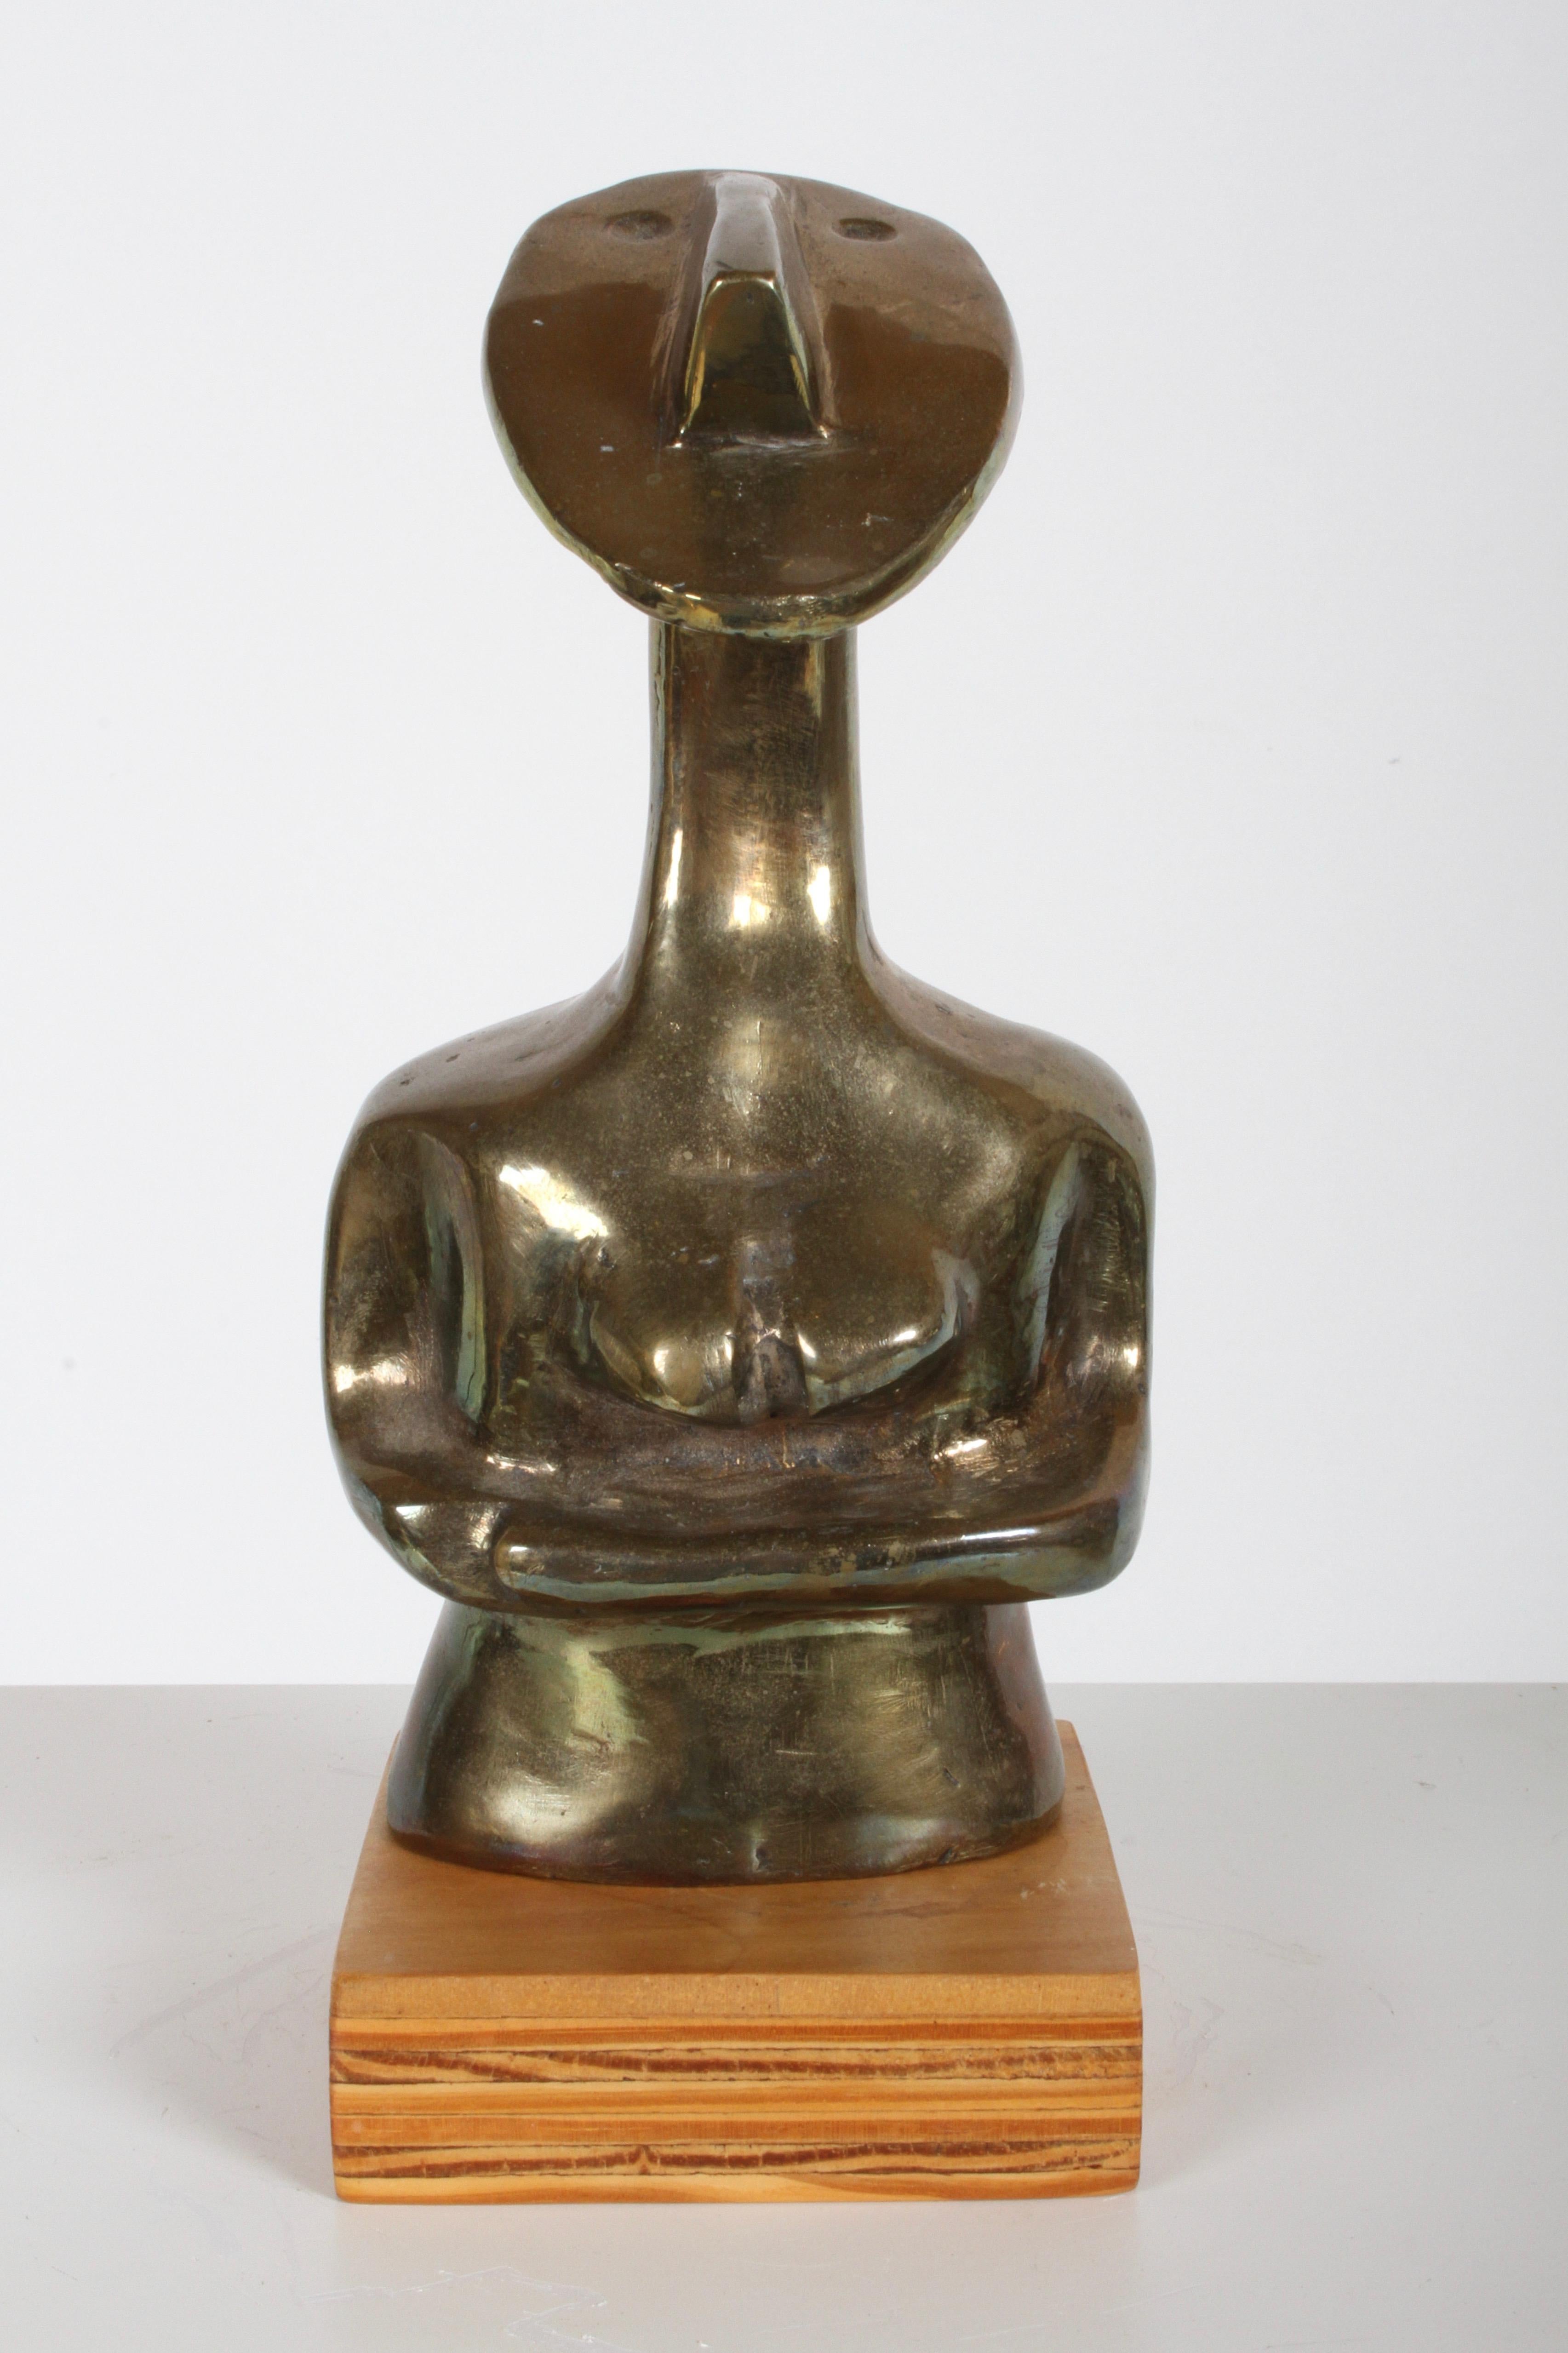 Unique Mid-Century Modern African cubist bronze sculpture of a nude female, heavily influenced by Pablo Picasso's early cubist work using African masks. Unsigned. In very nice condition. Sculpture only, not on wood base measures 8.63